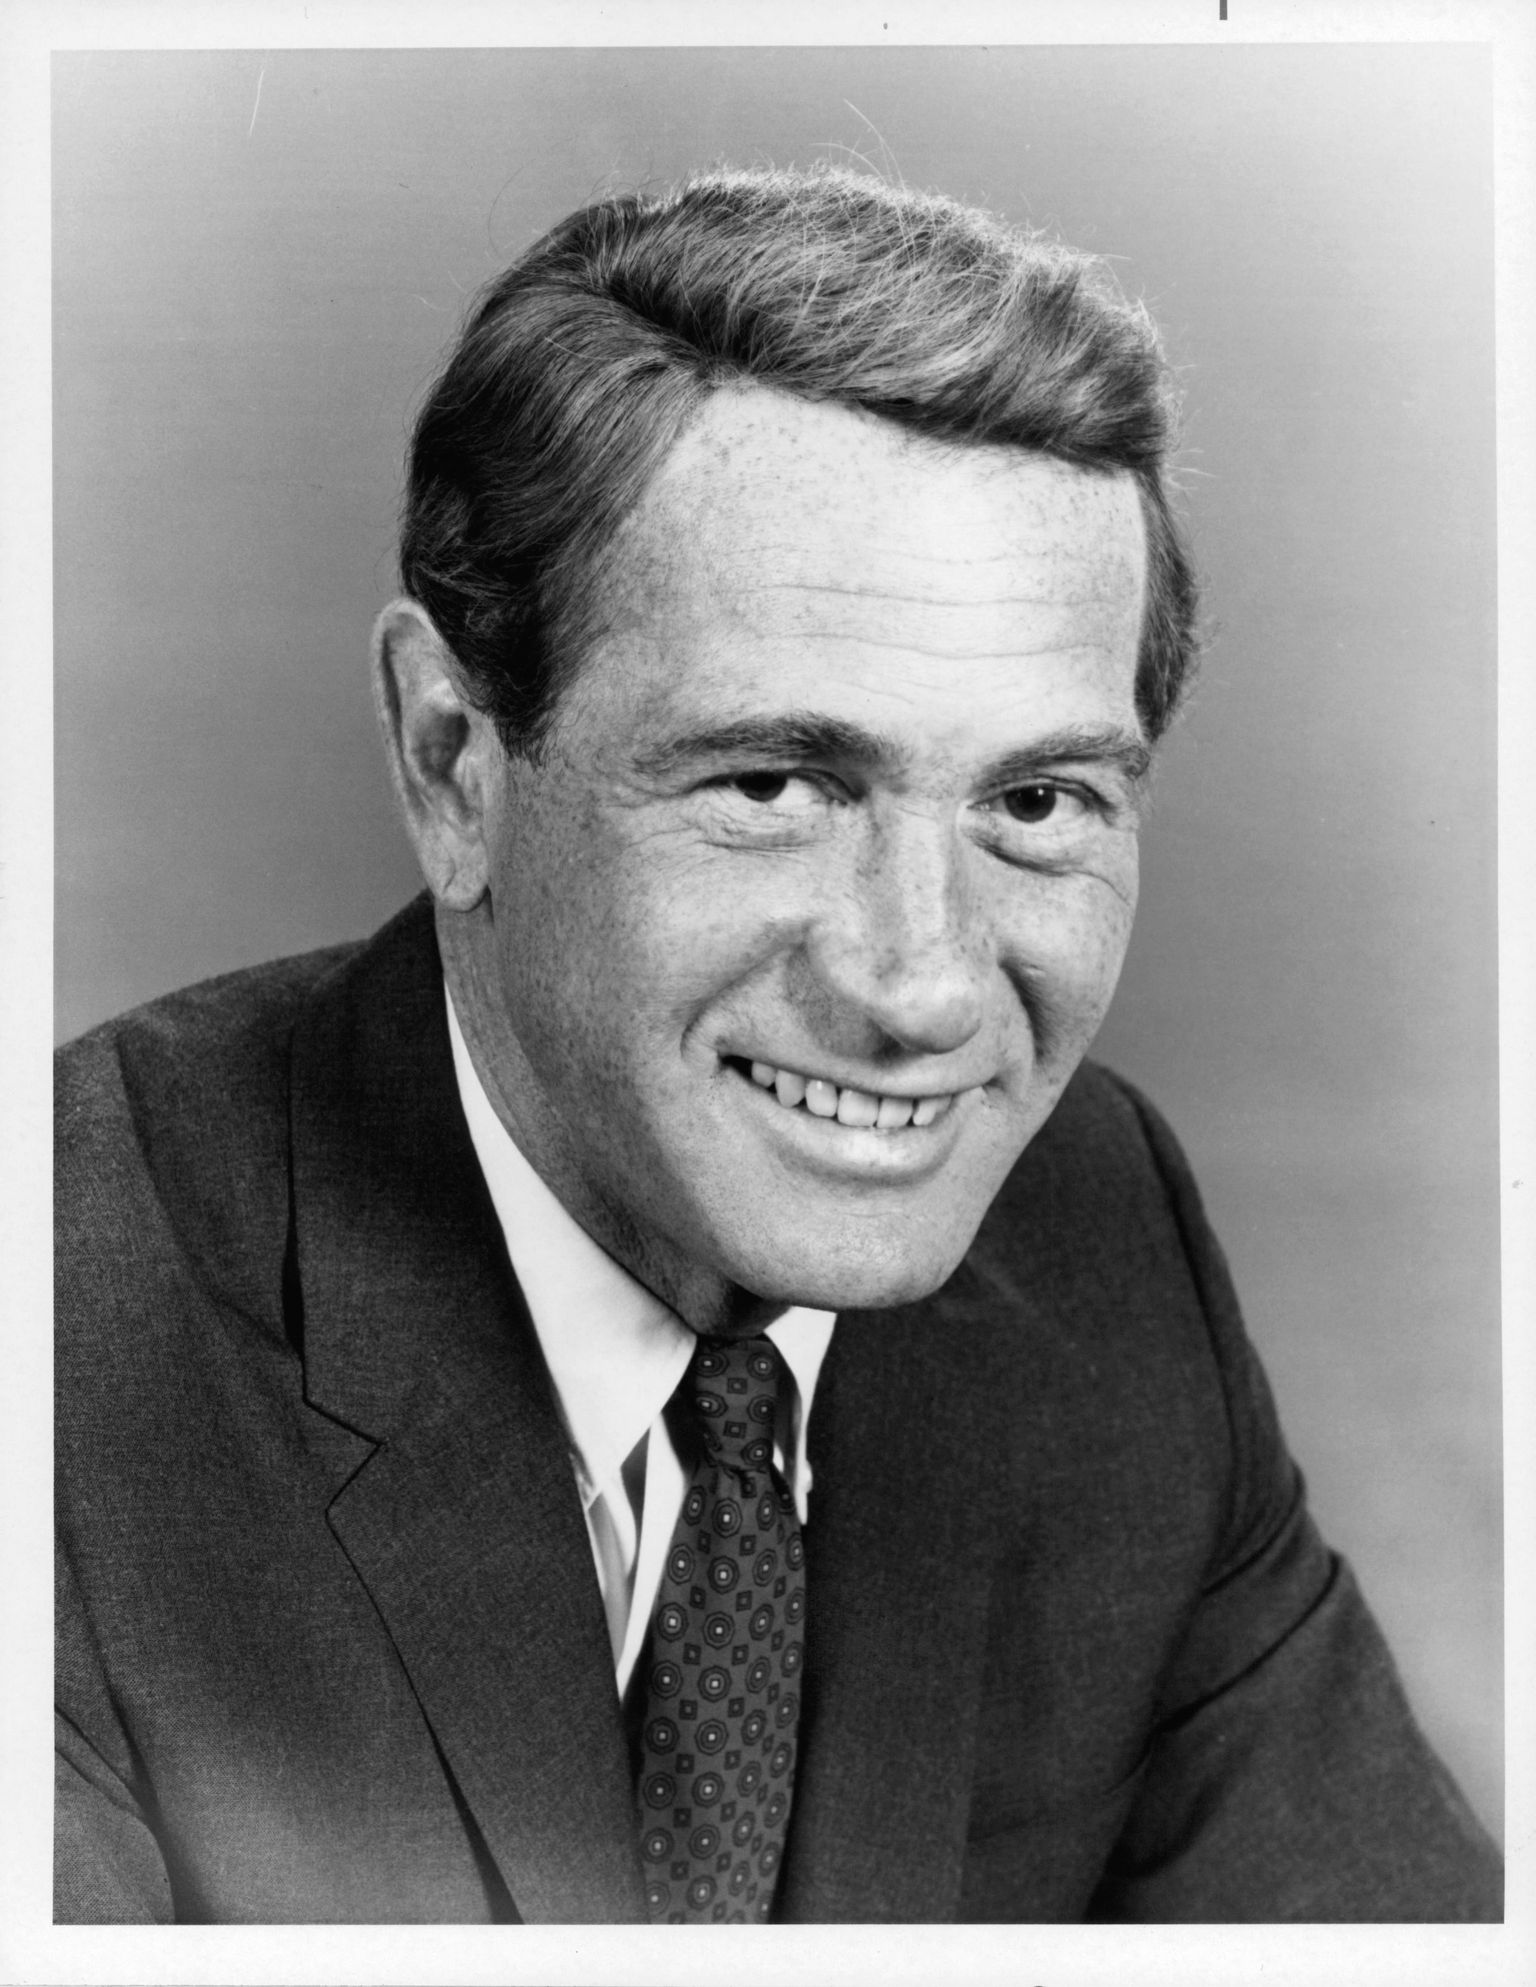 Darren McGavin pictured in 1968. | Photo: Getty Images